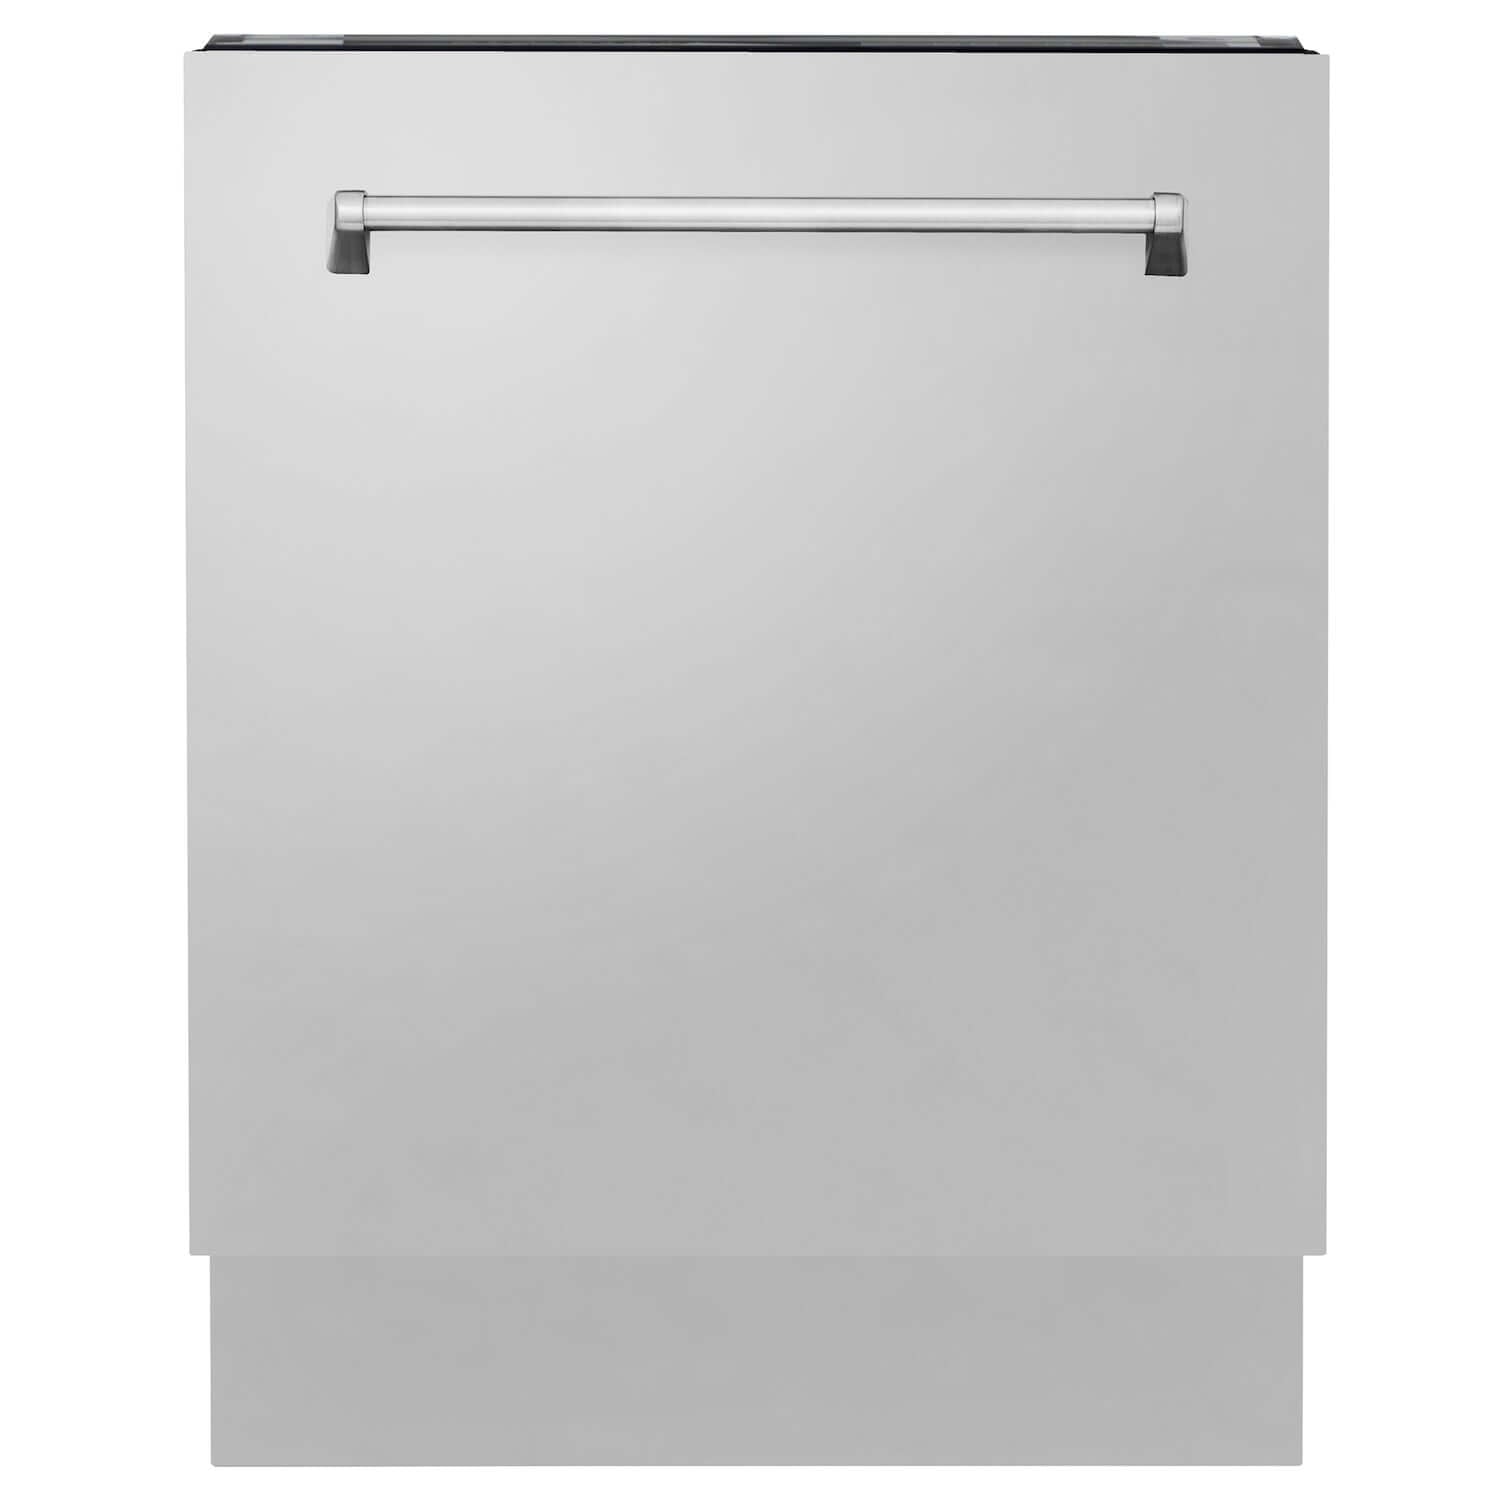 ZLINE 24" Stainless Steel Dishwasher front with door closed.